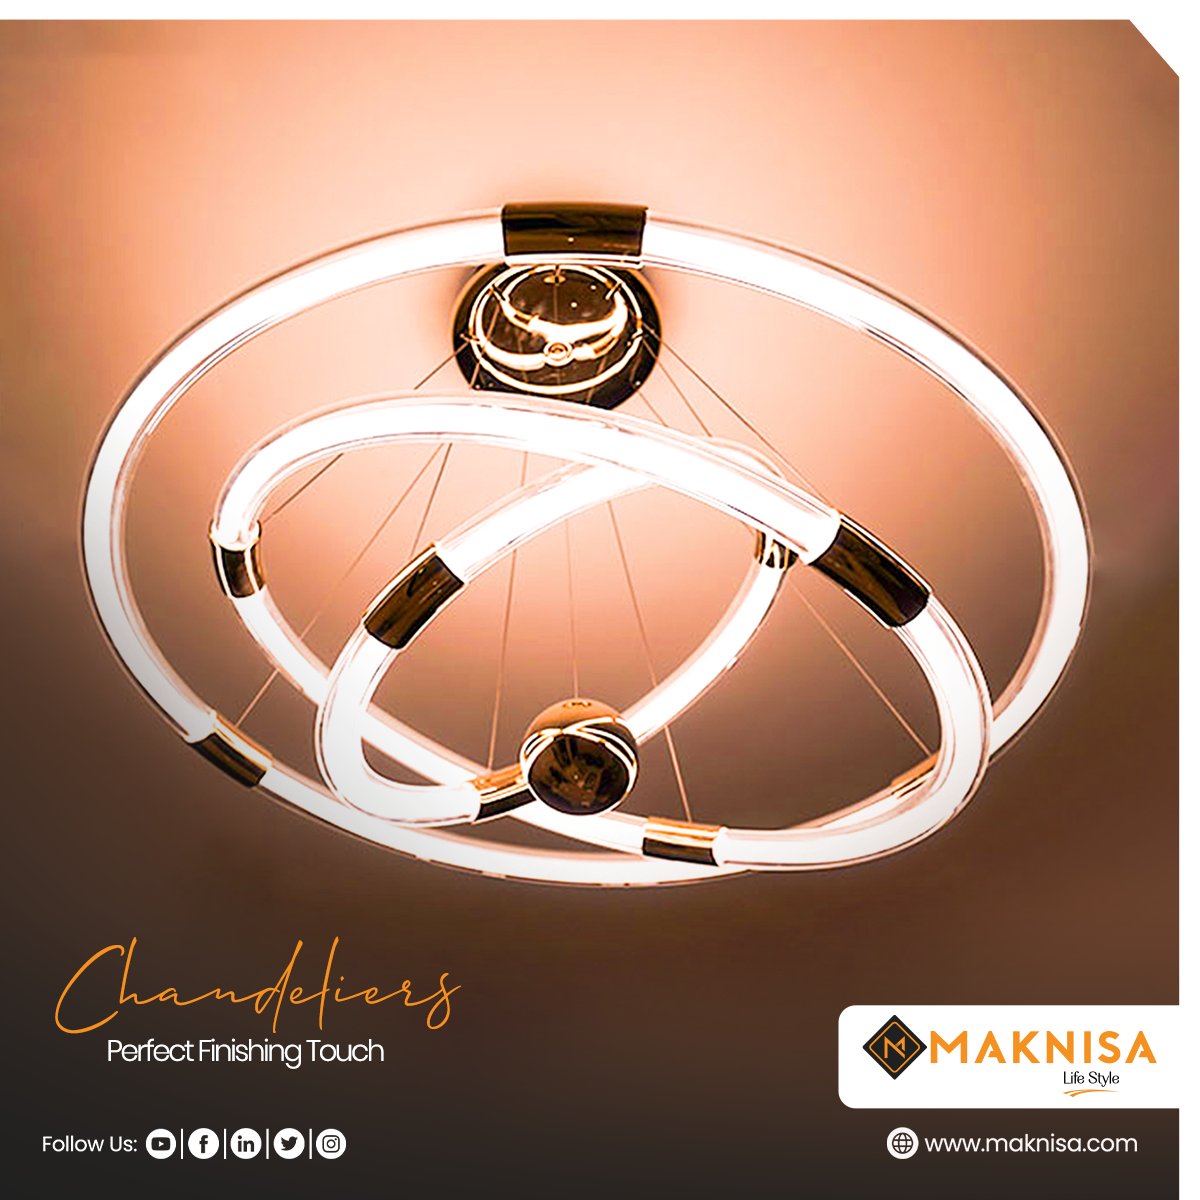 Let there be light, and lots of it, with MAKNISA chandelier.🥰

#livingroominterior #livingroomdesign #moderdecor #moderndesign #interiordesign #interiordecorating #interiorstyling #livingroomdesign #chanderlier #Livingroomdecor #classichomes #chandelier #houseandhome